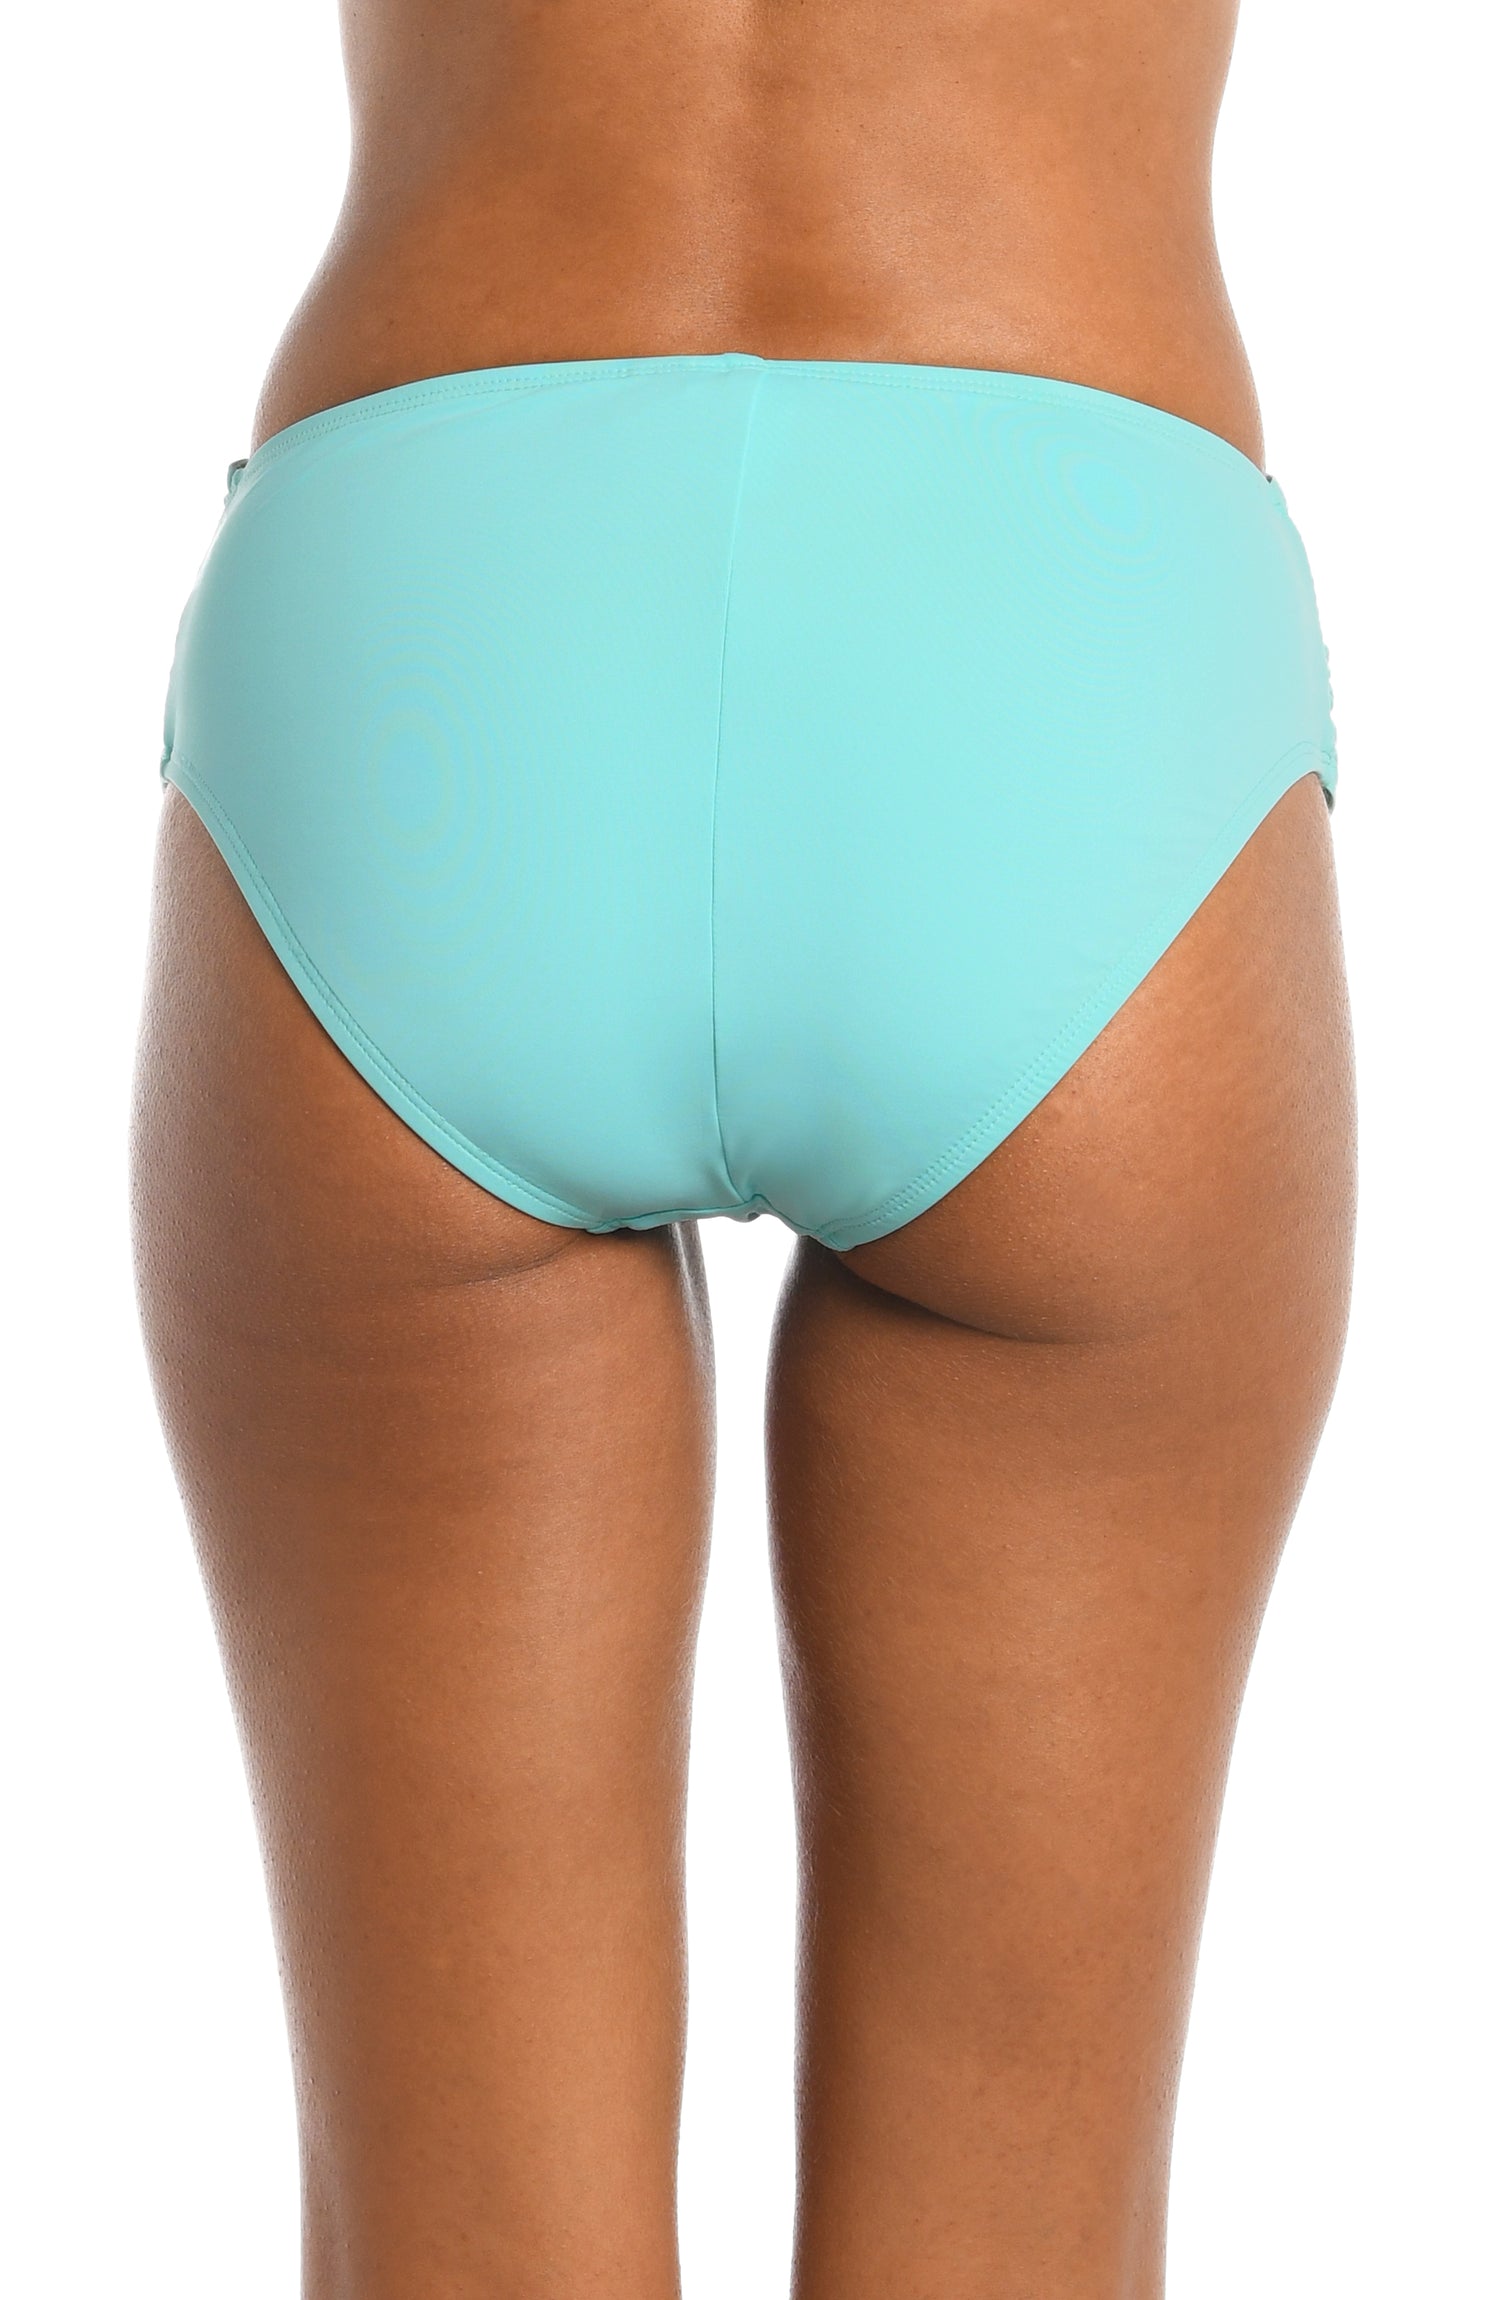 Model is wearing a ice blue colored mid-waist swimsuit bottom from our Best-Selling Island Goddess collection.